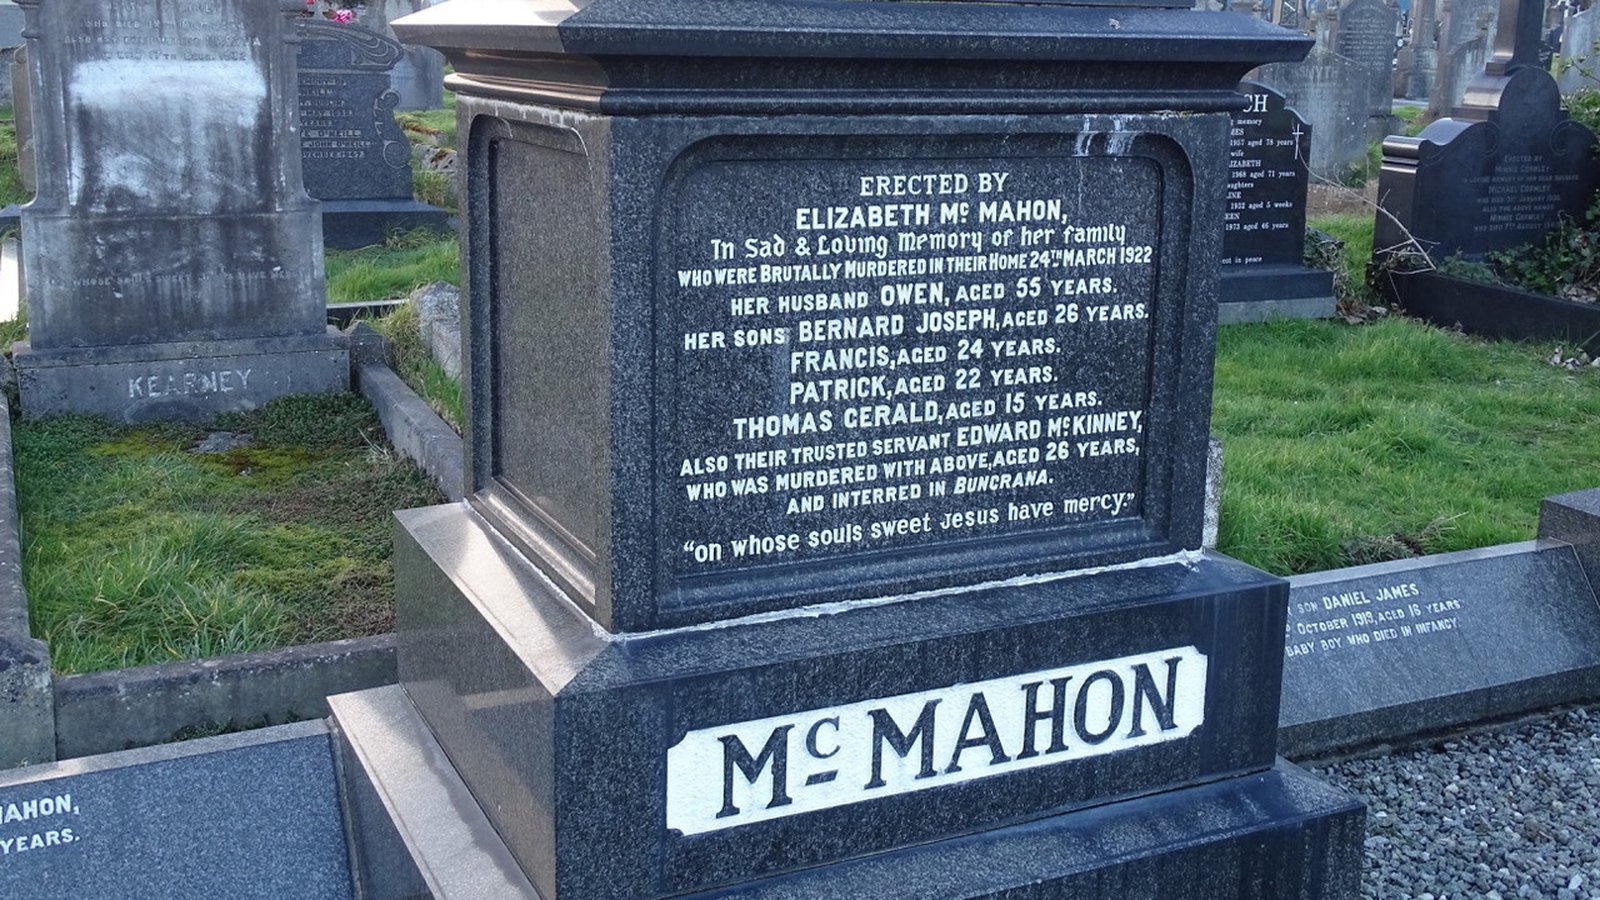 Image - The McMahon Family plot in Milltown Cemetery Belfast (Courtesy of Martin Magill)